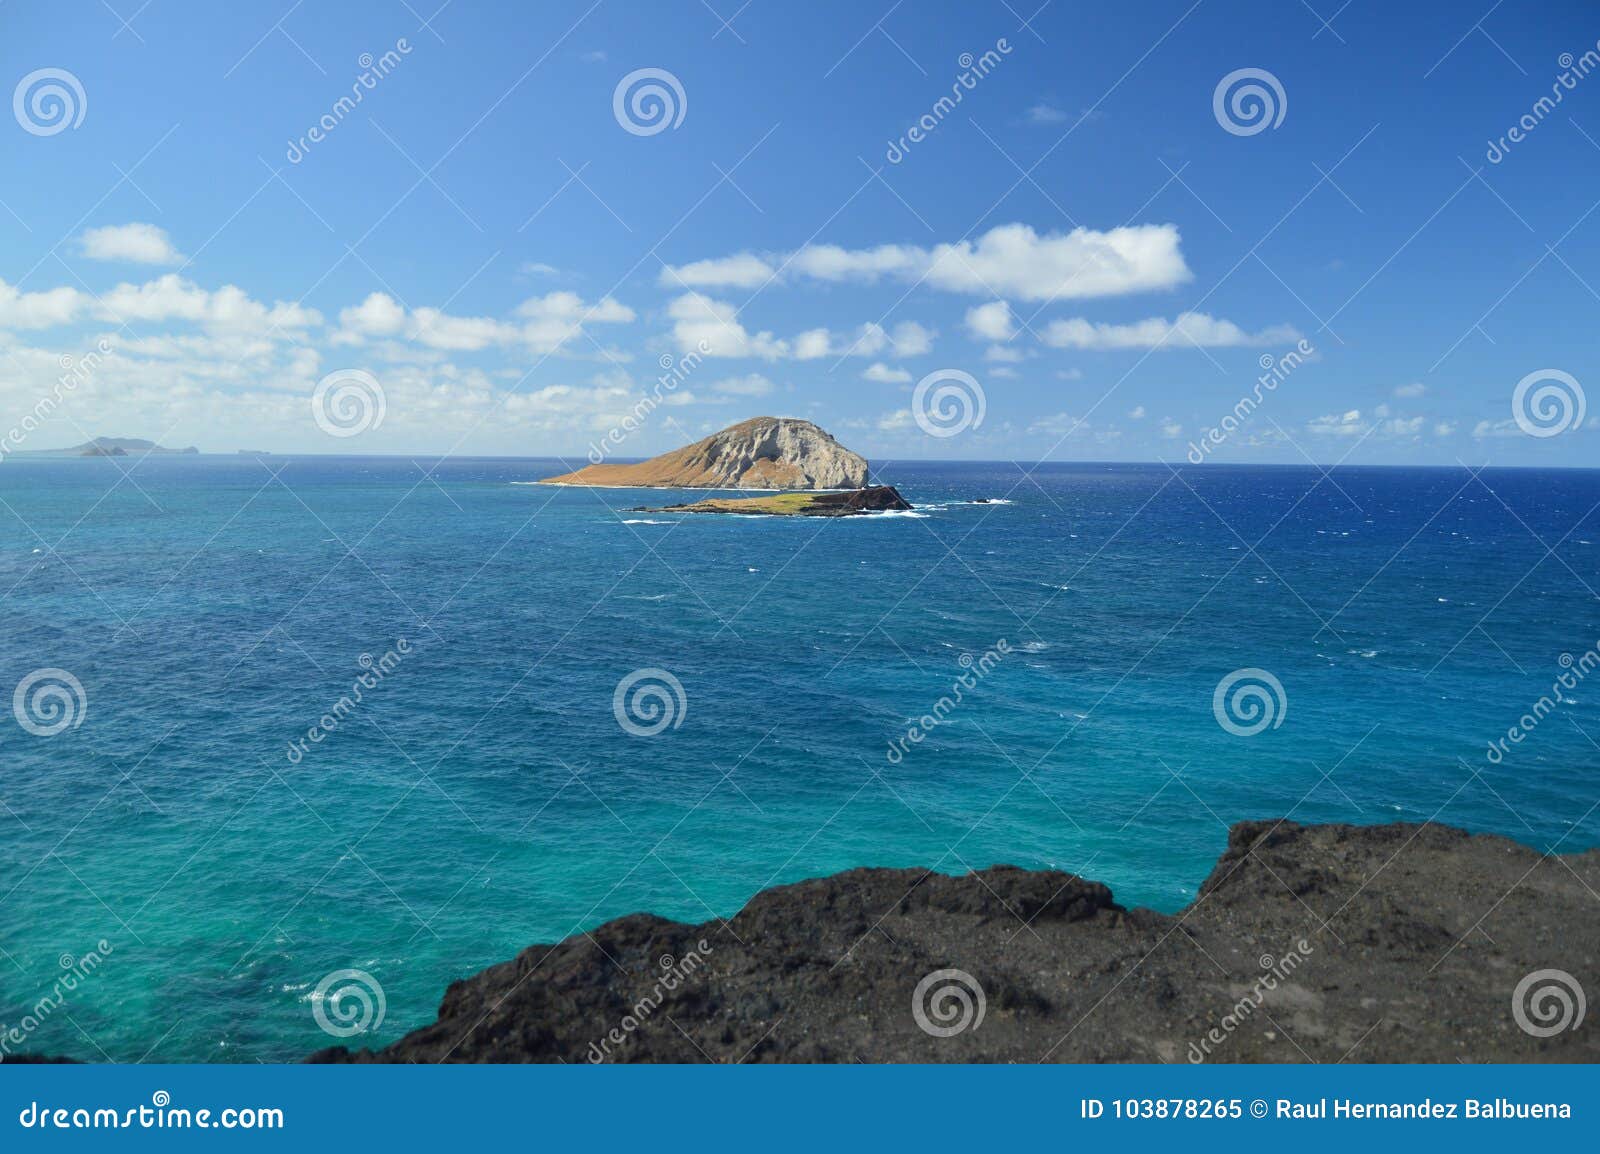 panoramic view of a beautiful islet.